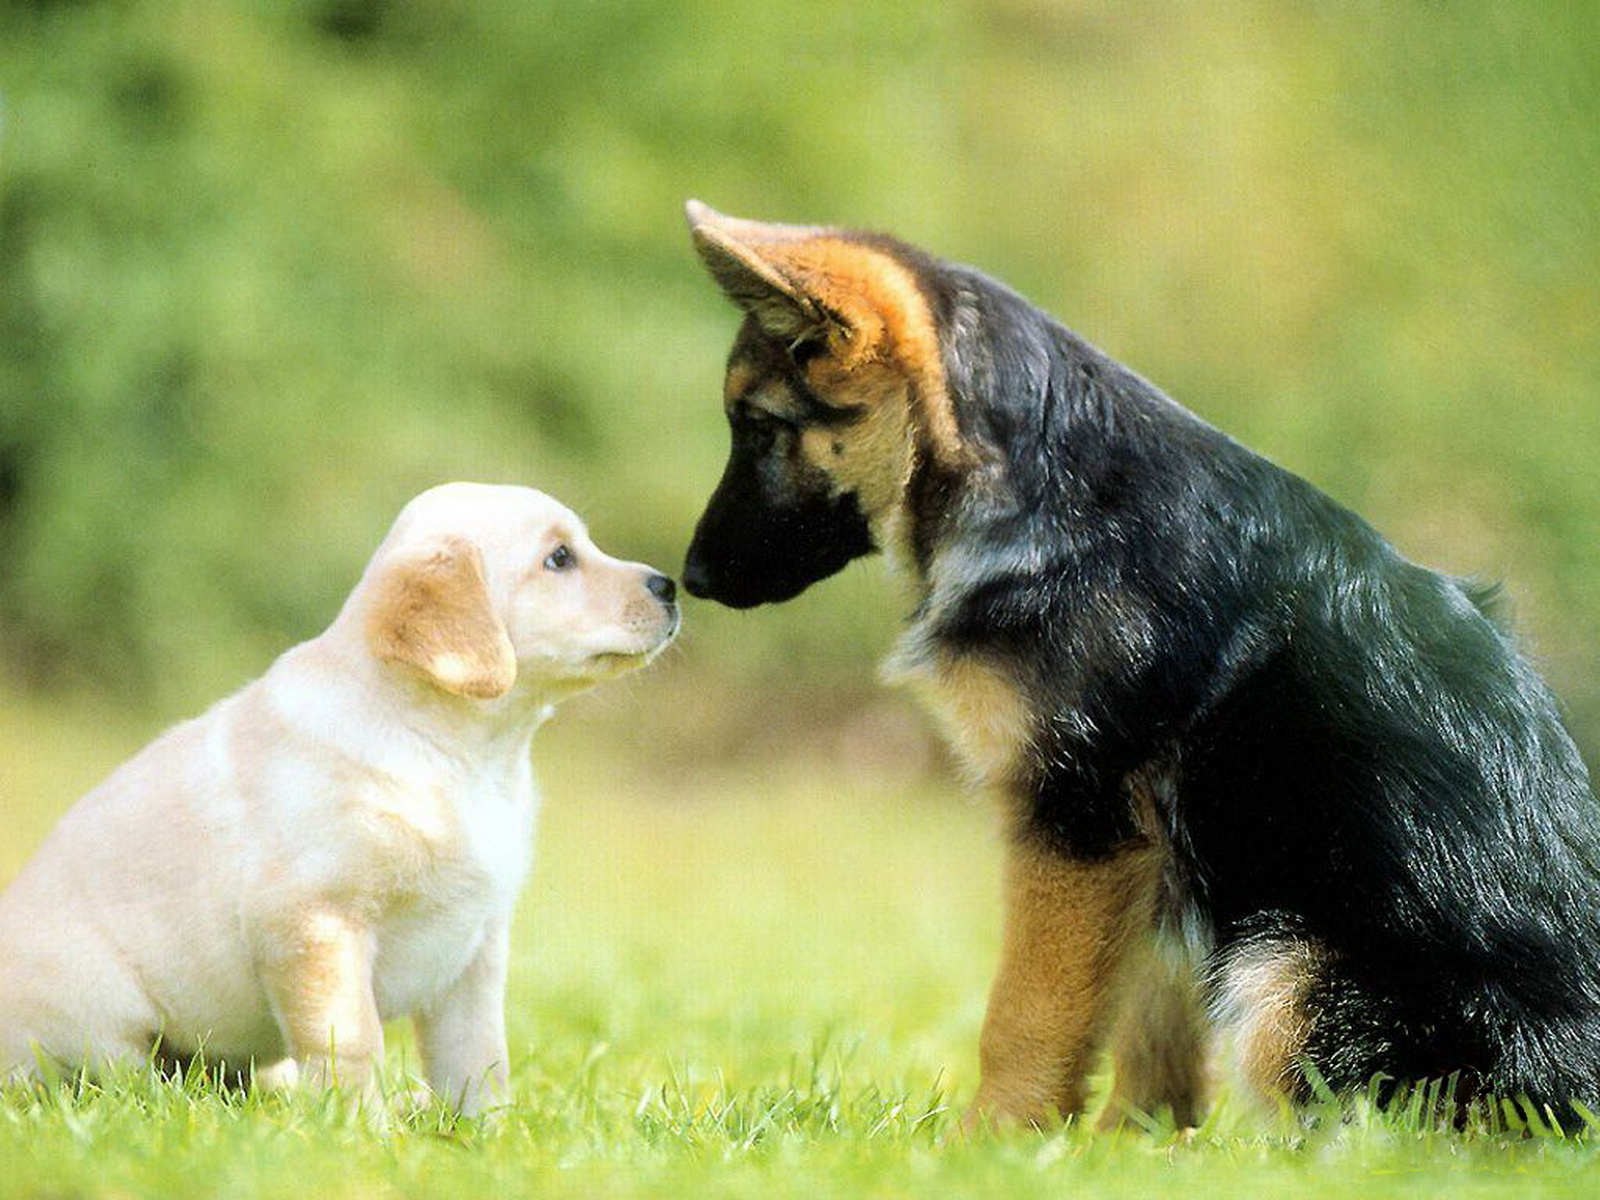  dogs care and affection amongst dogs love contrast cute dogs dogs in 1600x1200